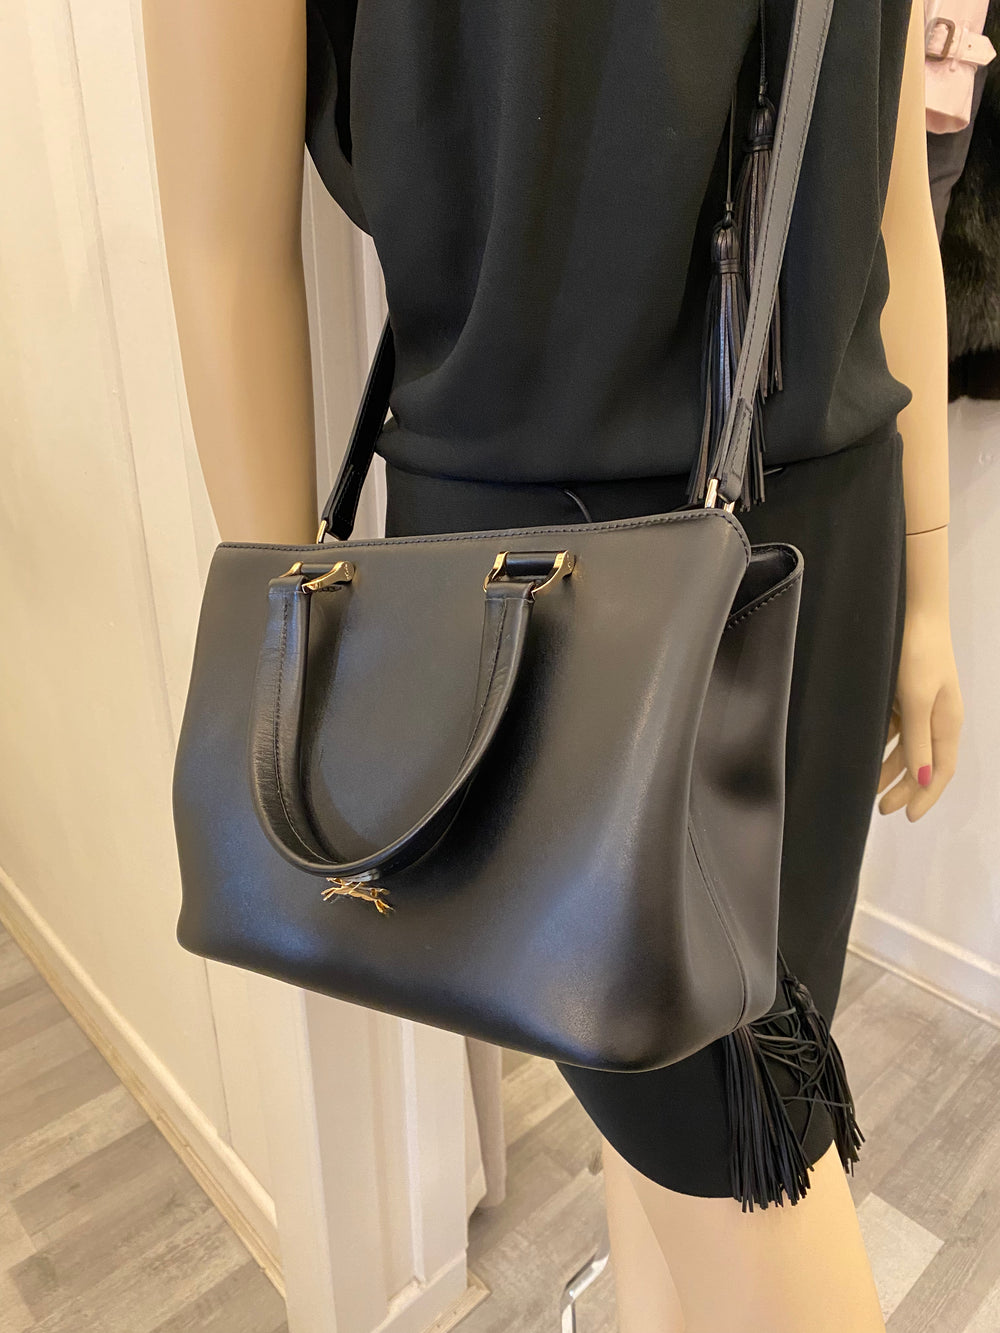 Longchamp Black leather Tote  (as new)